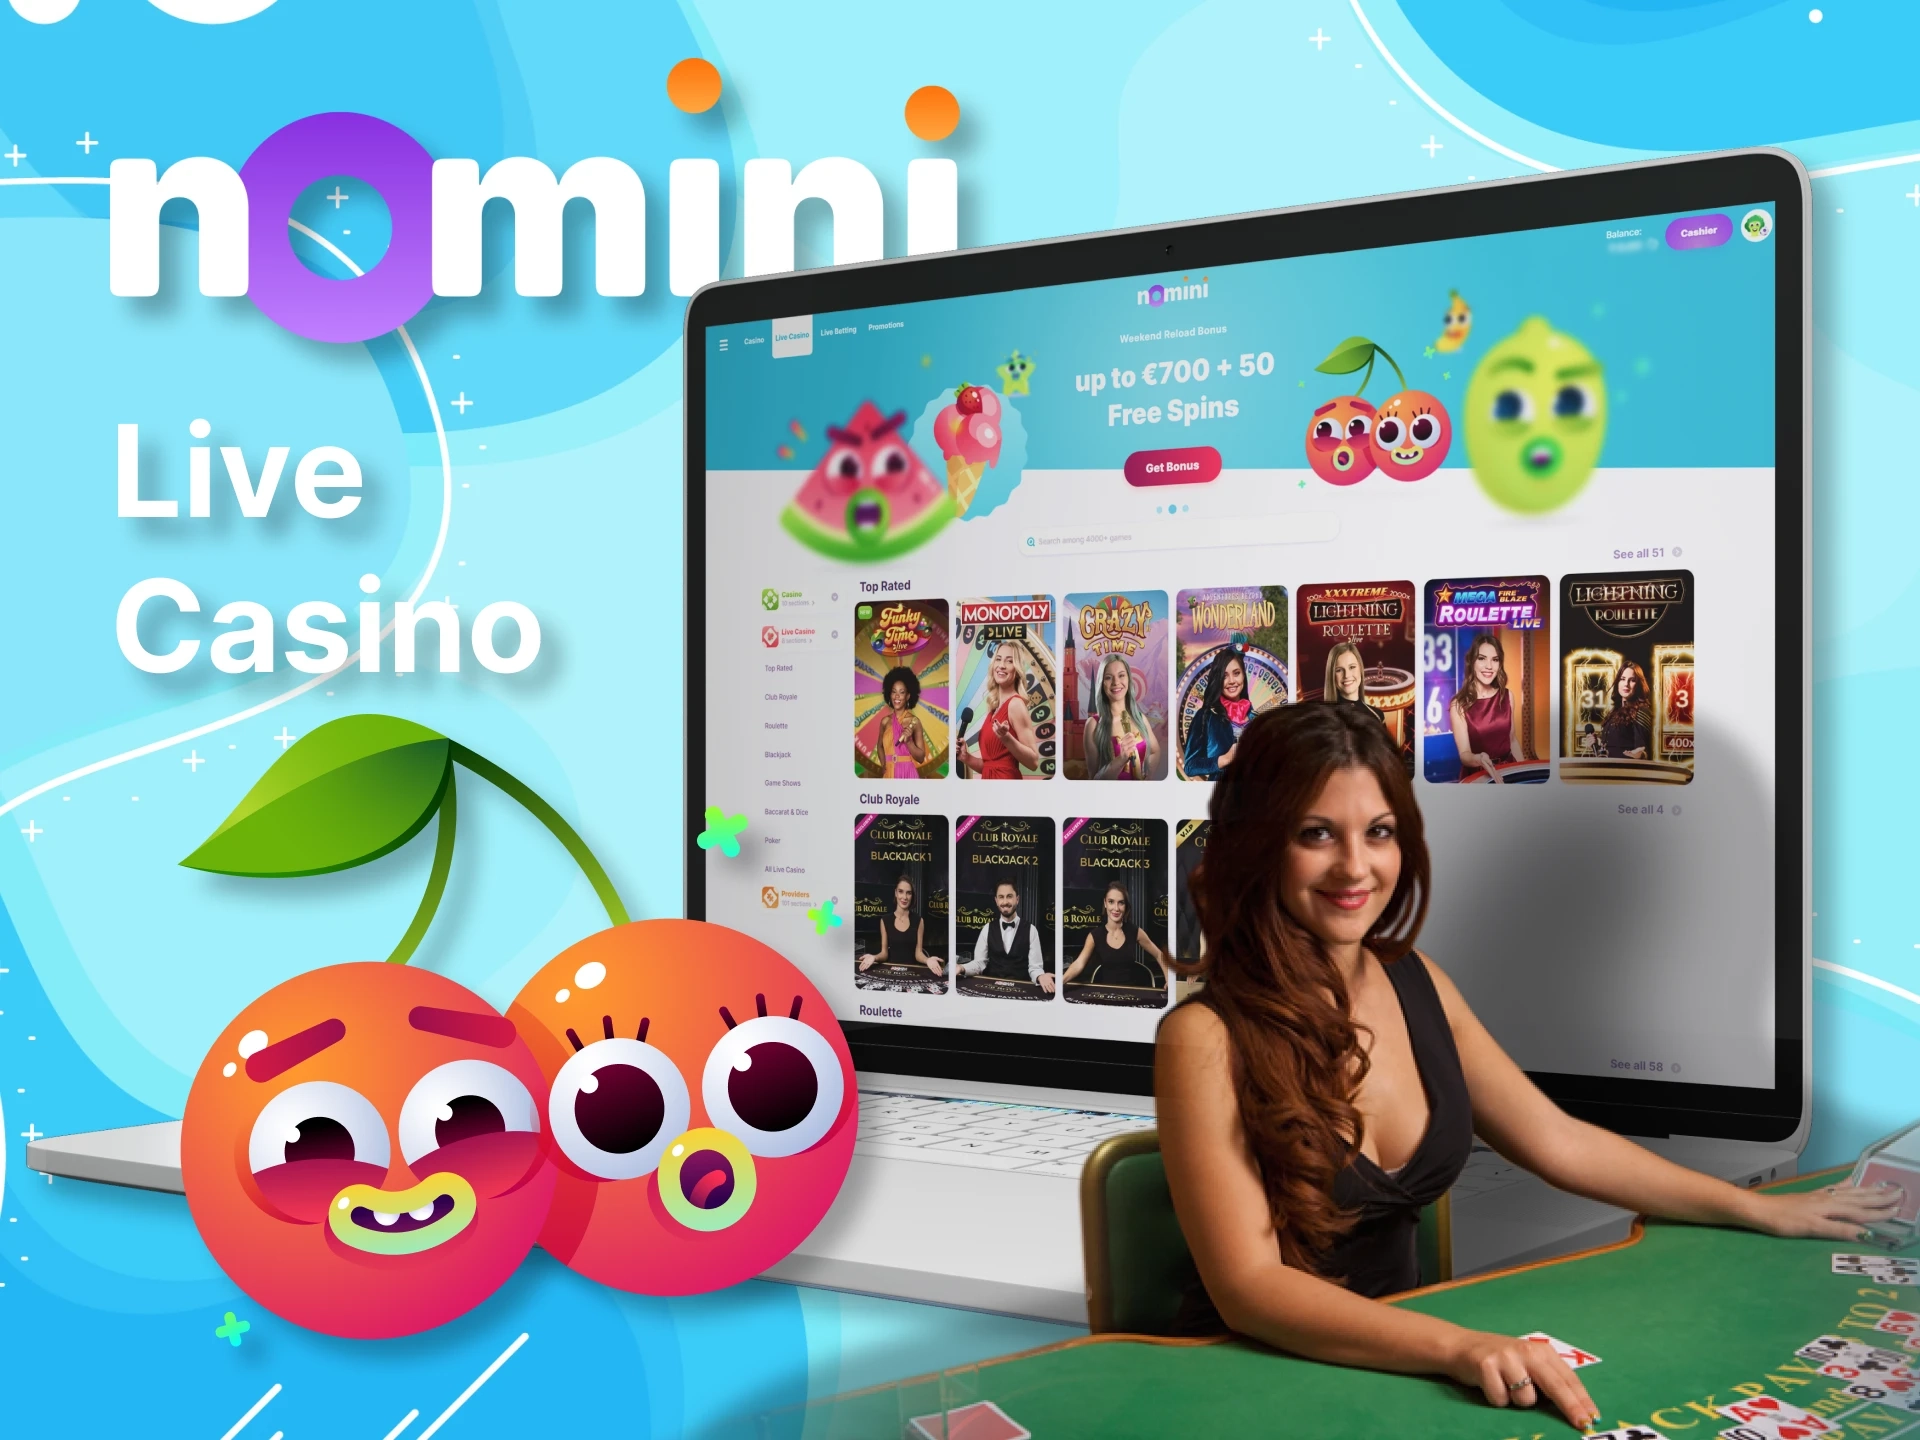 Nomini offers to play with dealers in the live casino.